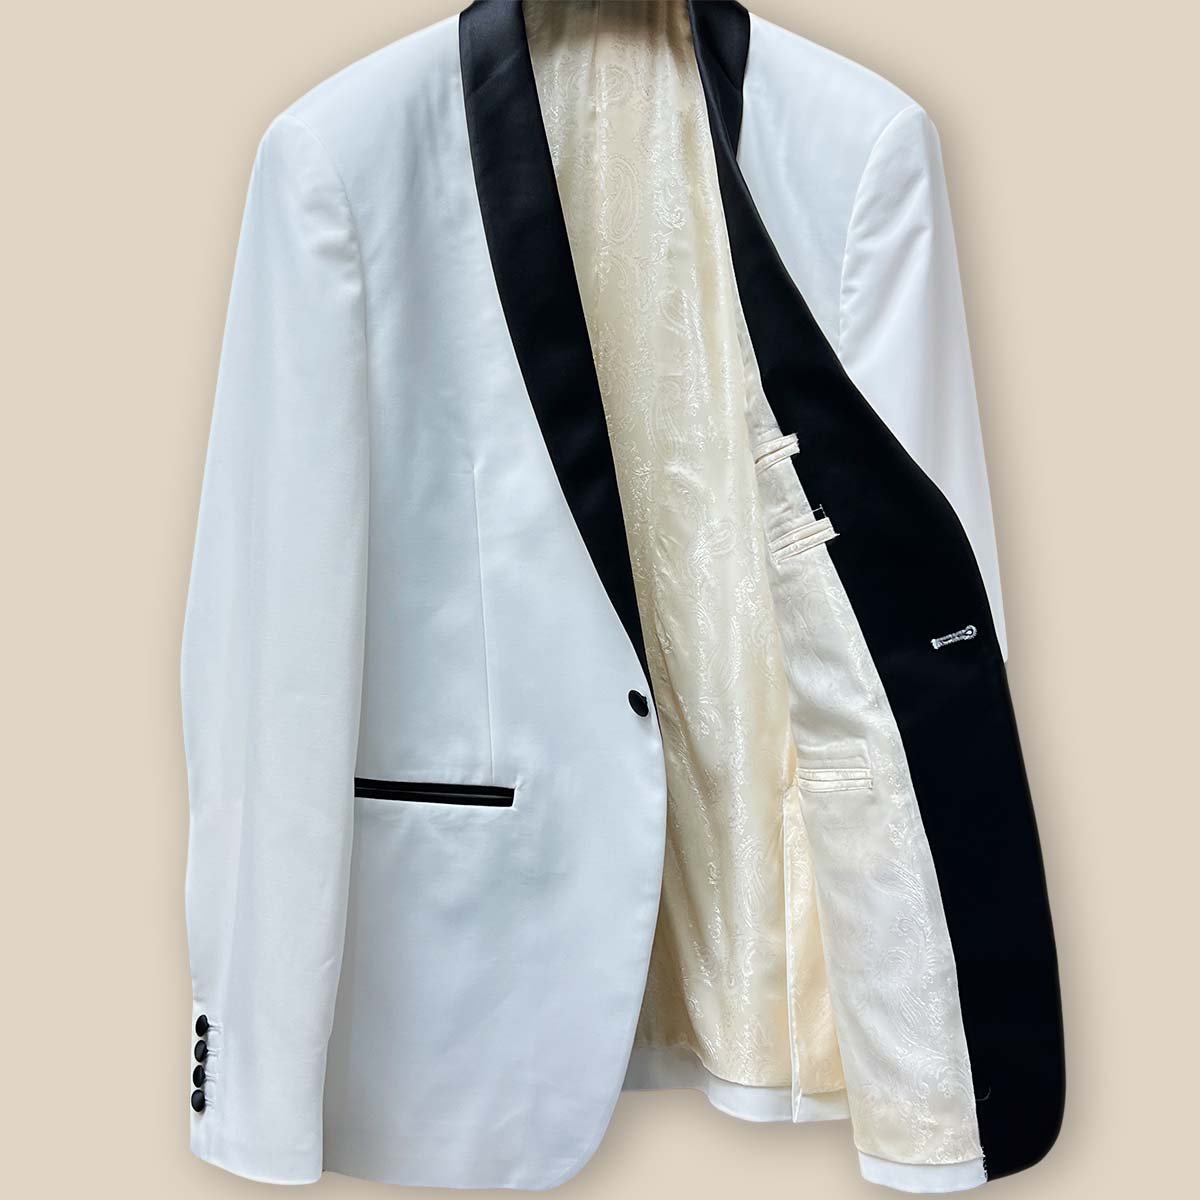 Inside view of the left side of the ivory tuxedo jacket showcasing the off white paisley lining and inner pocket.